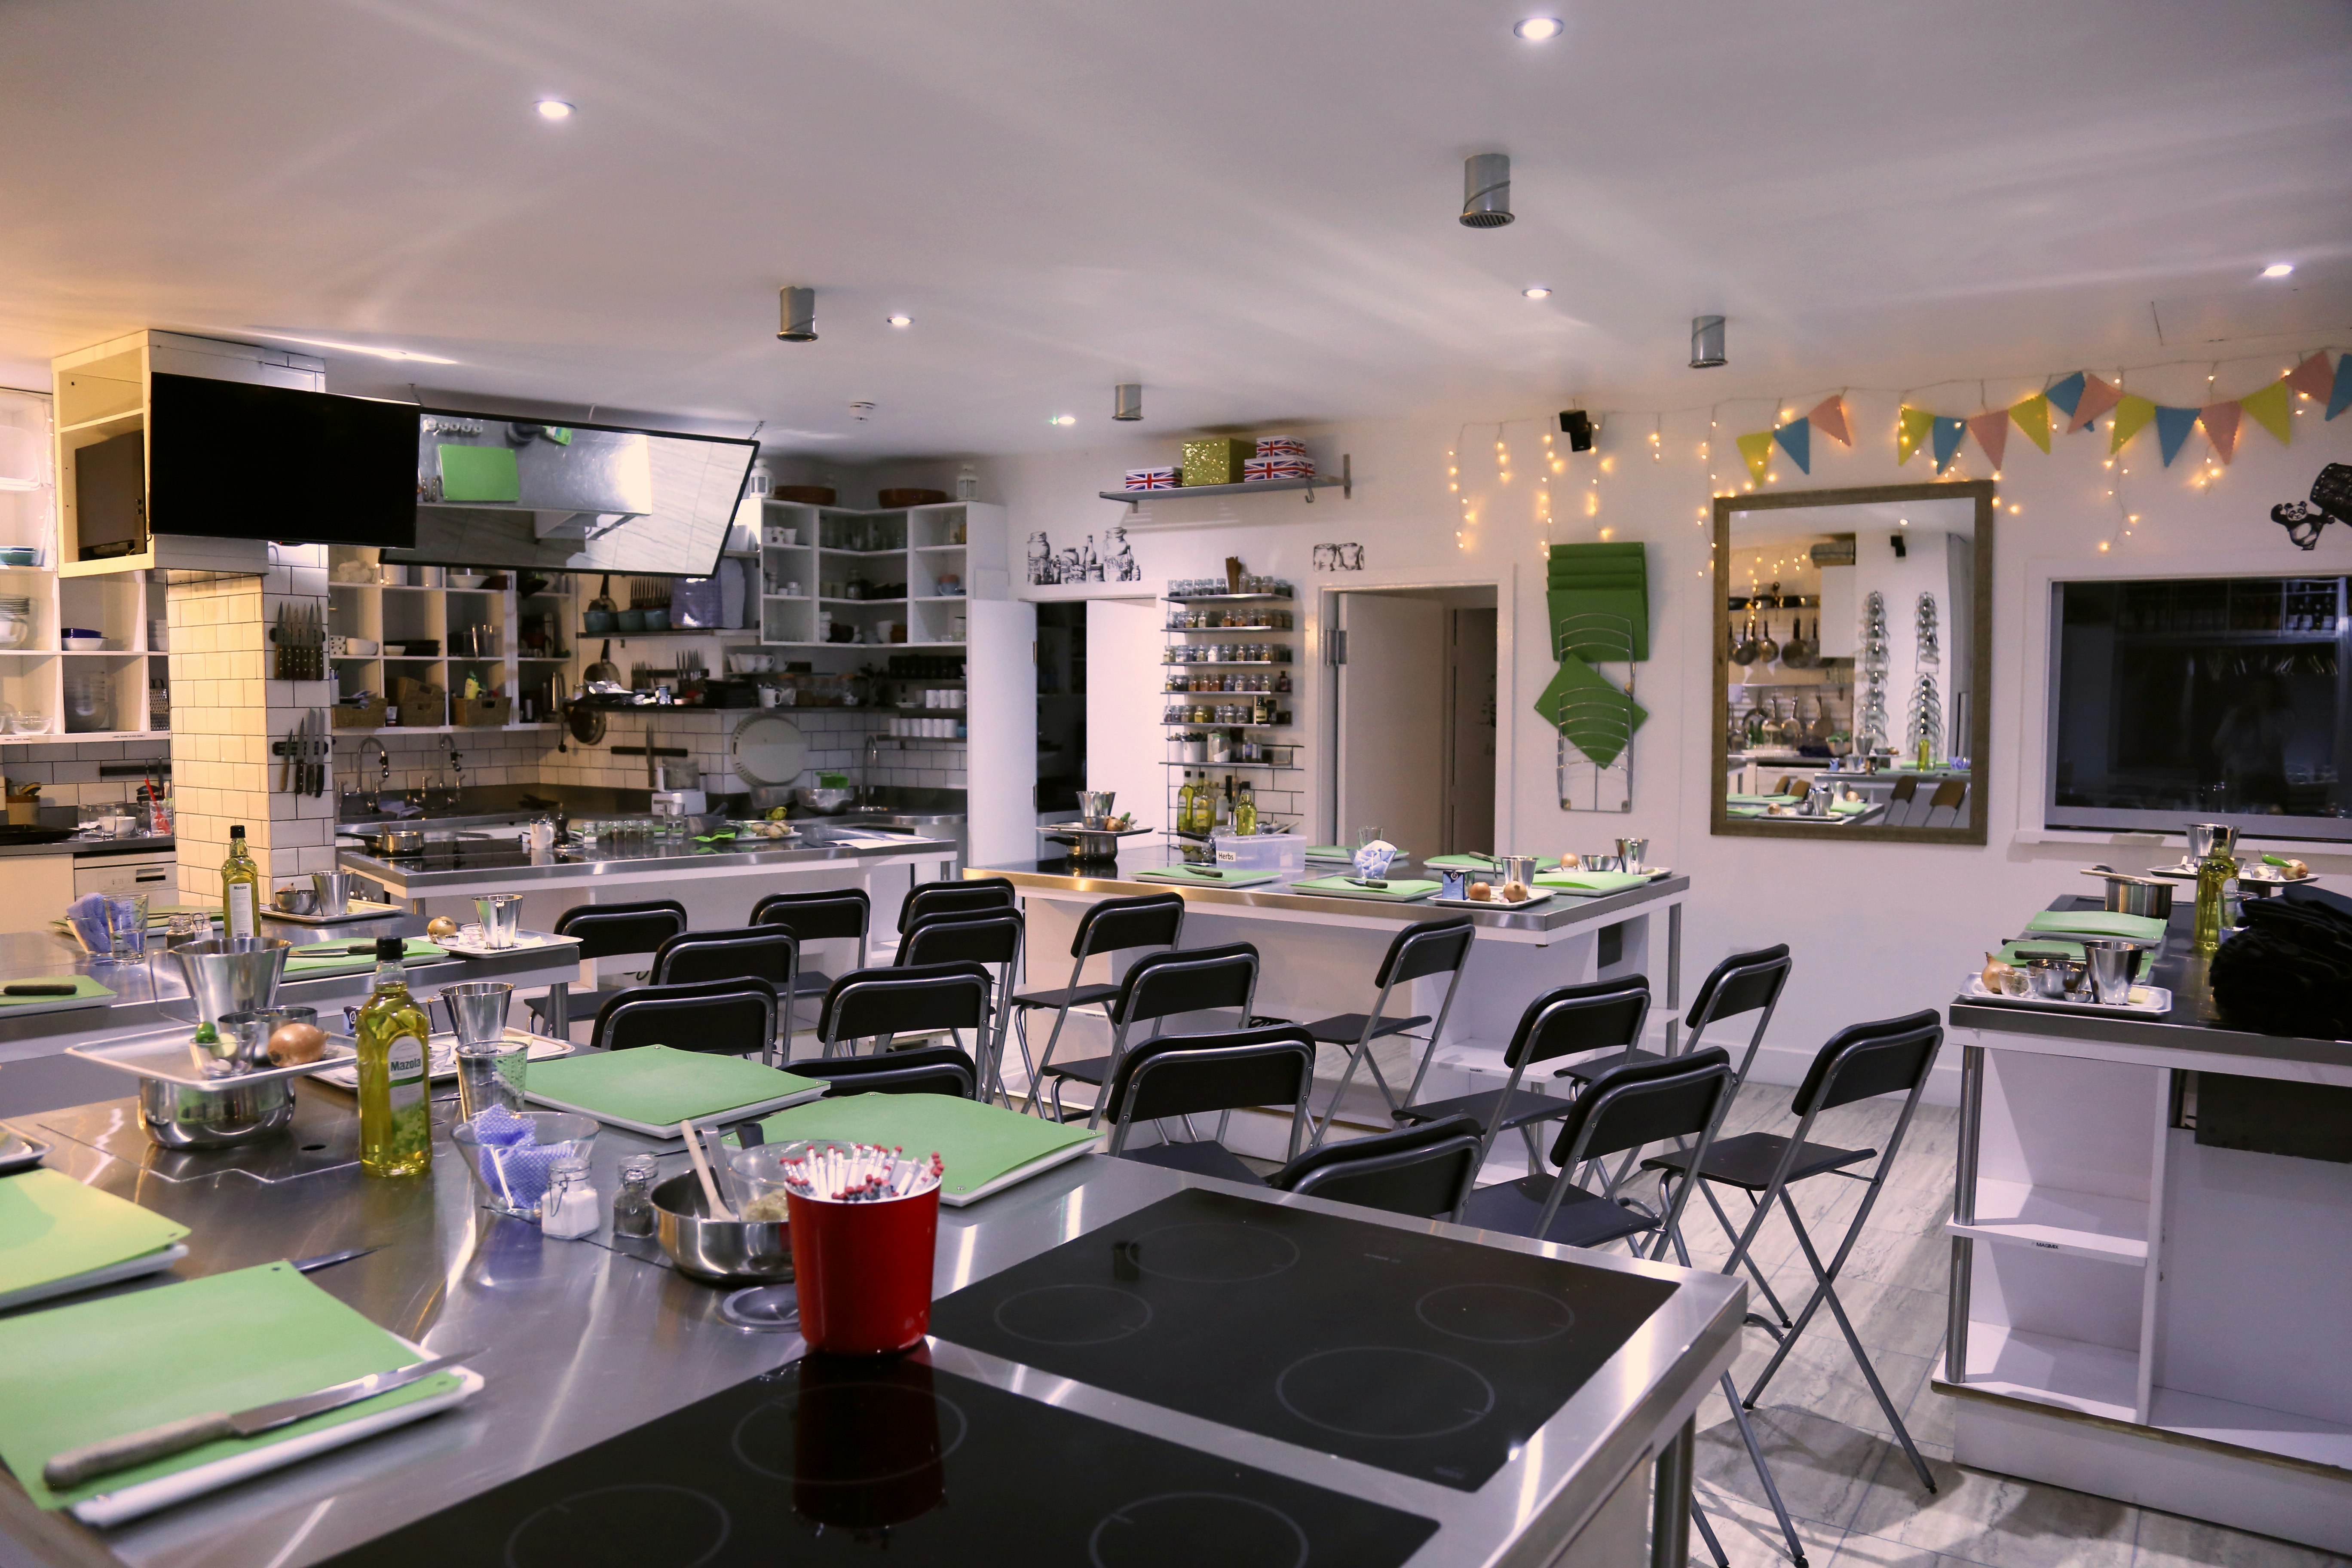 Complete Kitchen @ The Avenue Cookery School - Professional Kitchen to rent & hire image 9